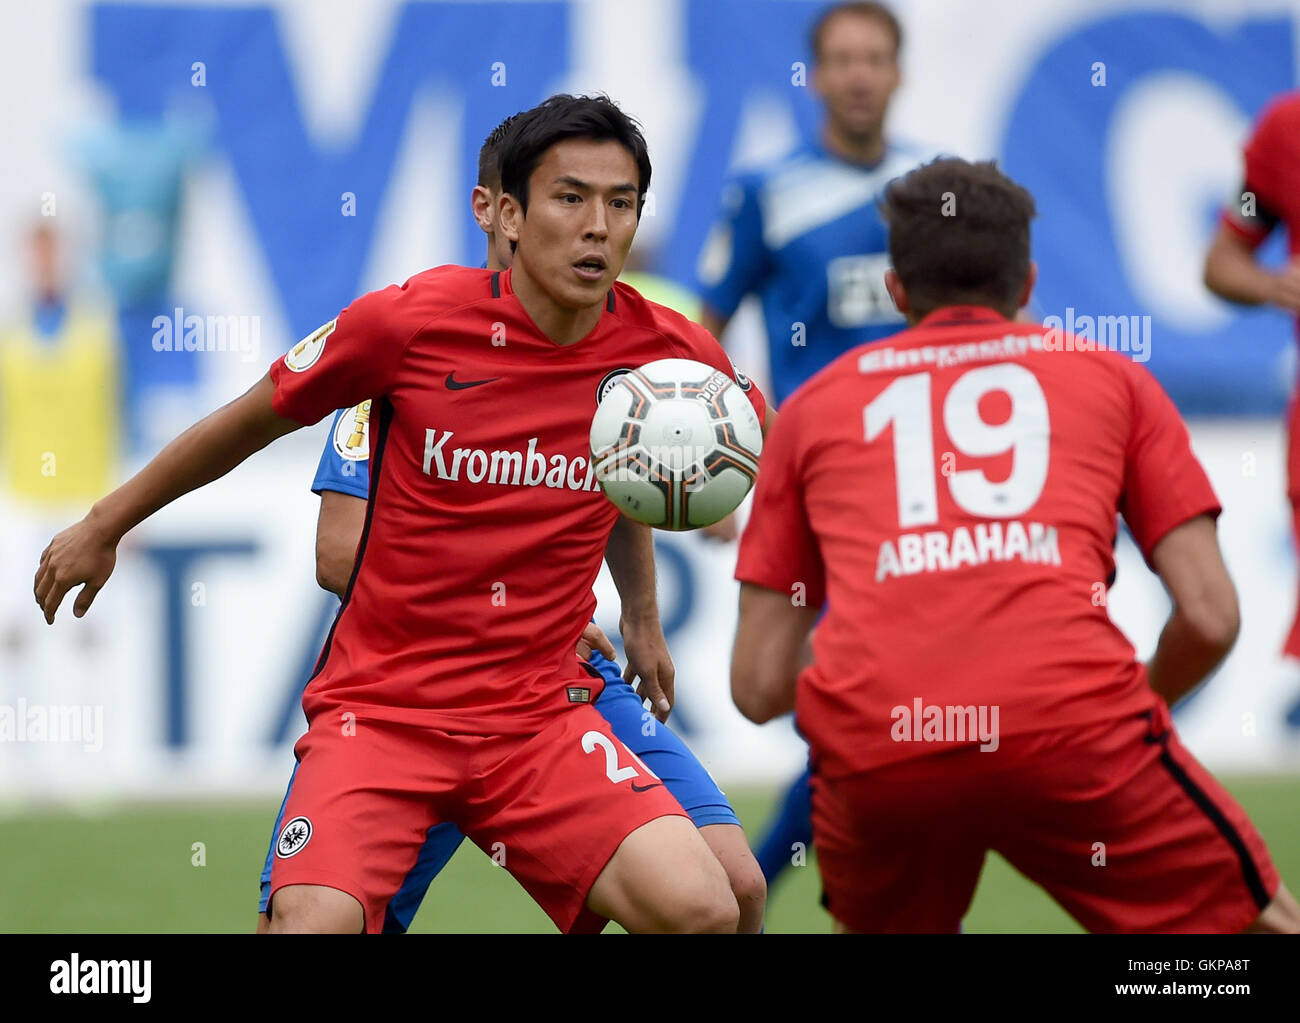 Magdeburg, Germany. 21st Aug, 2016. Frankfurt's Makoto Hasebe (l) and David Abraham with the ball in the match of 1. FC Magdeburg against Eintracht Frankfurt in the first round of the DFB Cup at the MDCC-Arena in Magdeburg, Germany, 21 August 2016. Eintracht Frankfurt won the match on penalties. Photo: Britta Pedersen/dpa/Alamy Live News Stock Photo